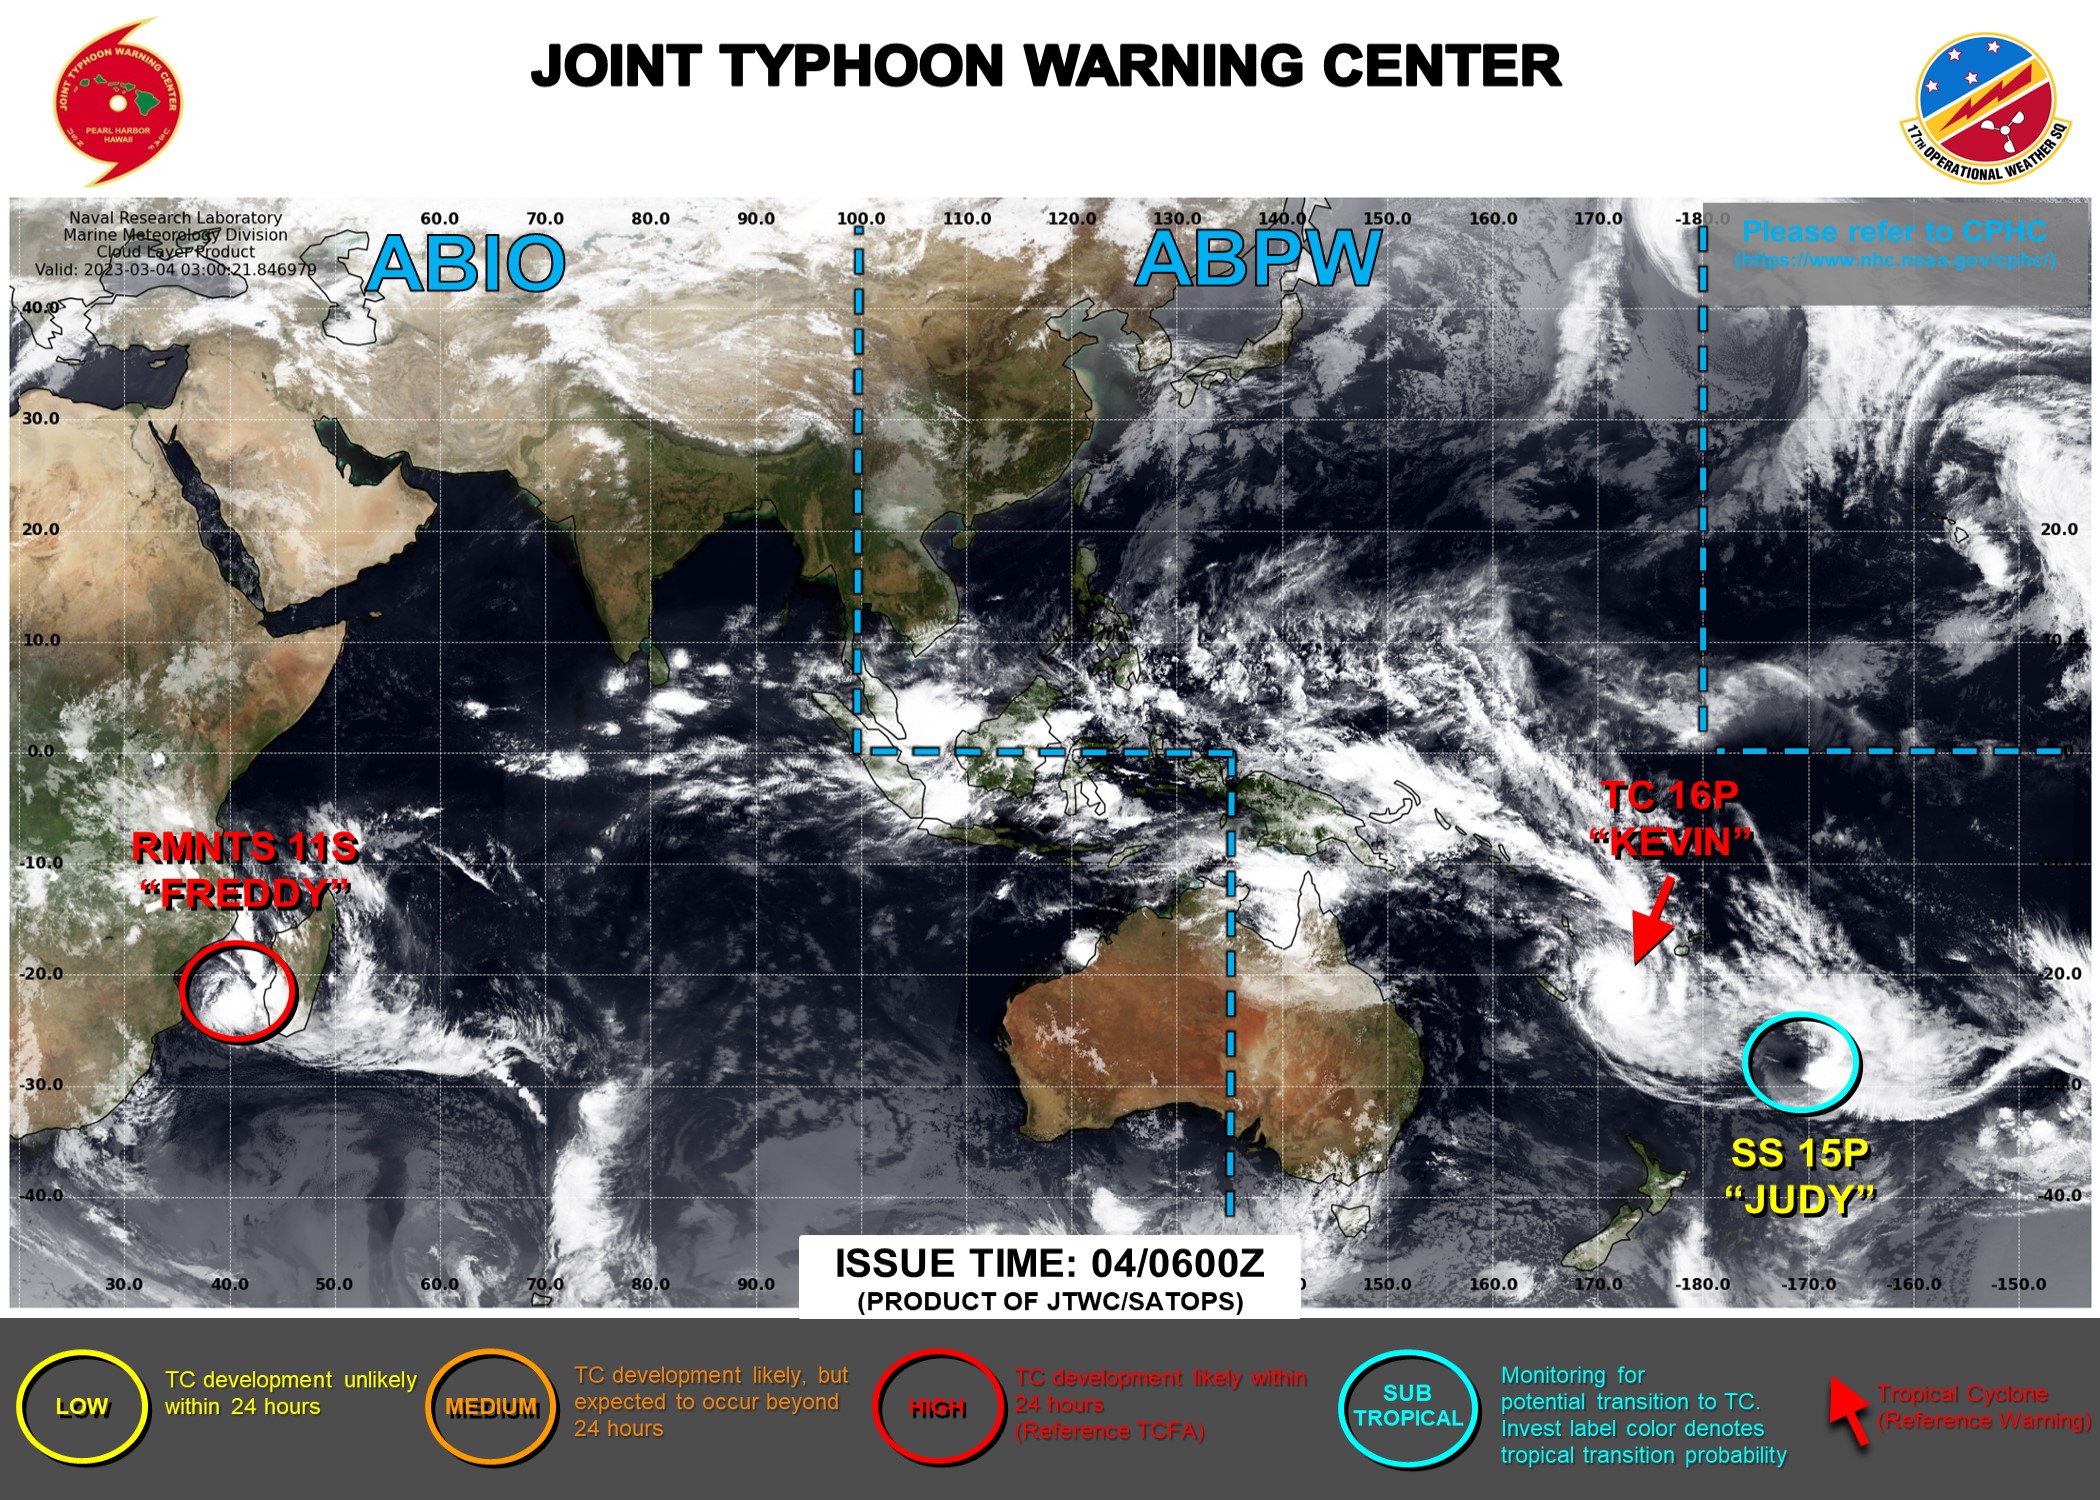 JTWC IS ISSUING 6HOURLY WARNINGS AND 3HOURLY SATELLITE BULLETINS ON TC 16P(KEVIN). 3HOURLY SATELLITE BULLETINS ARE ISSUED ON SS 15P(JUDY) AND THE REMNANTS OF TC 11S(FREDDY).